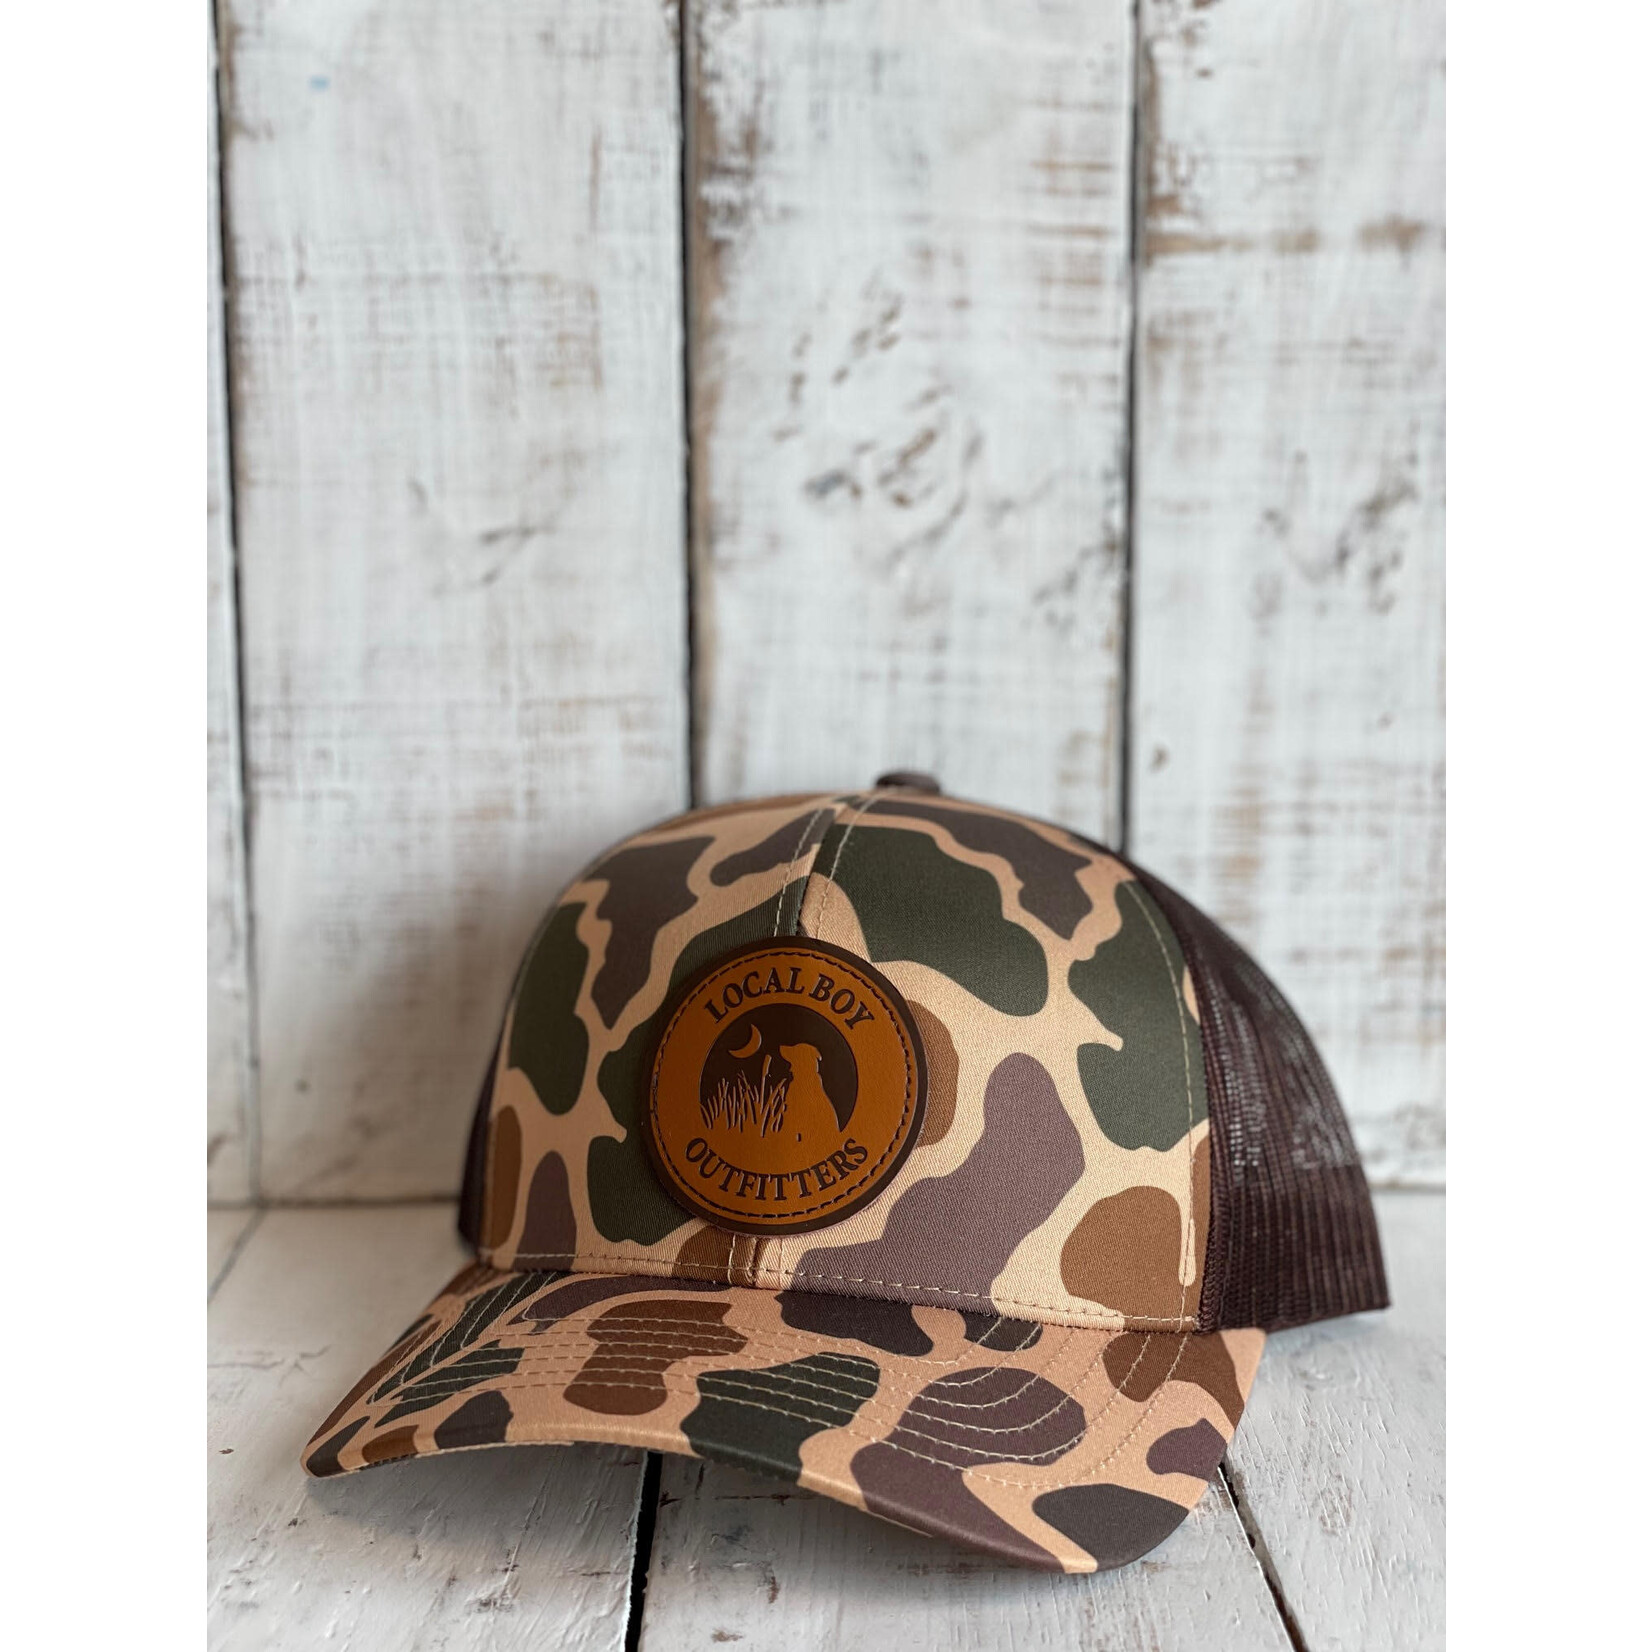 Local Boy Leather Patch Hat-Old School Camo